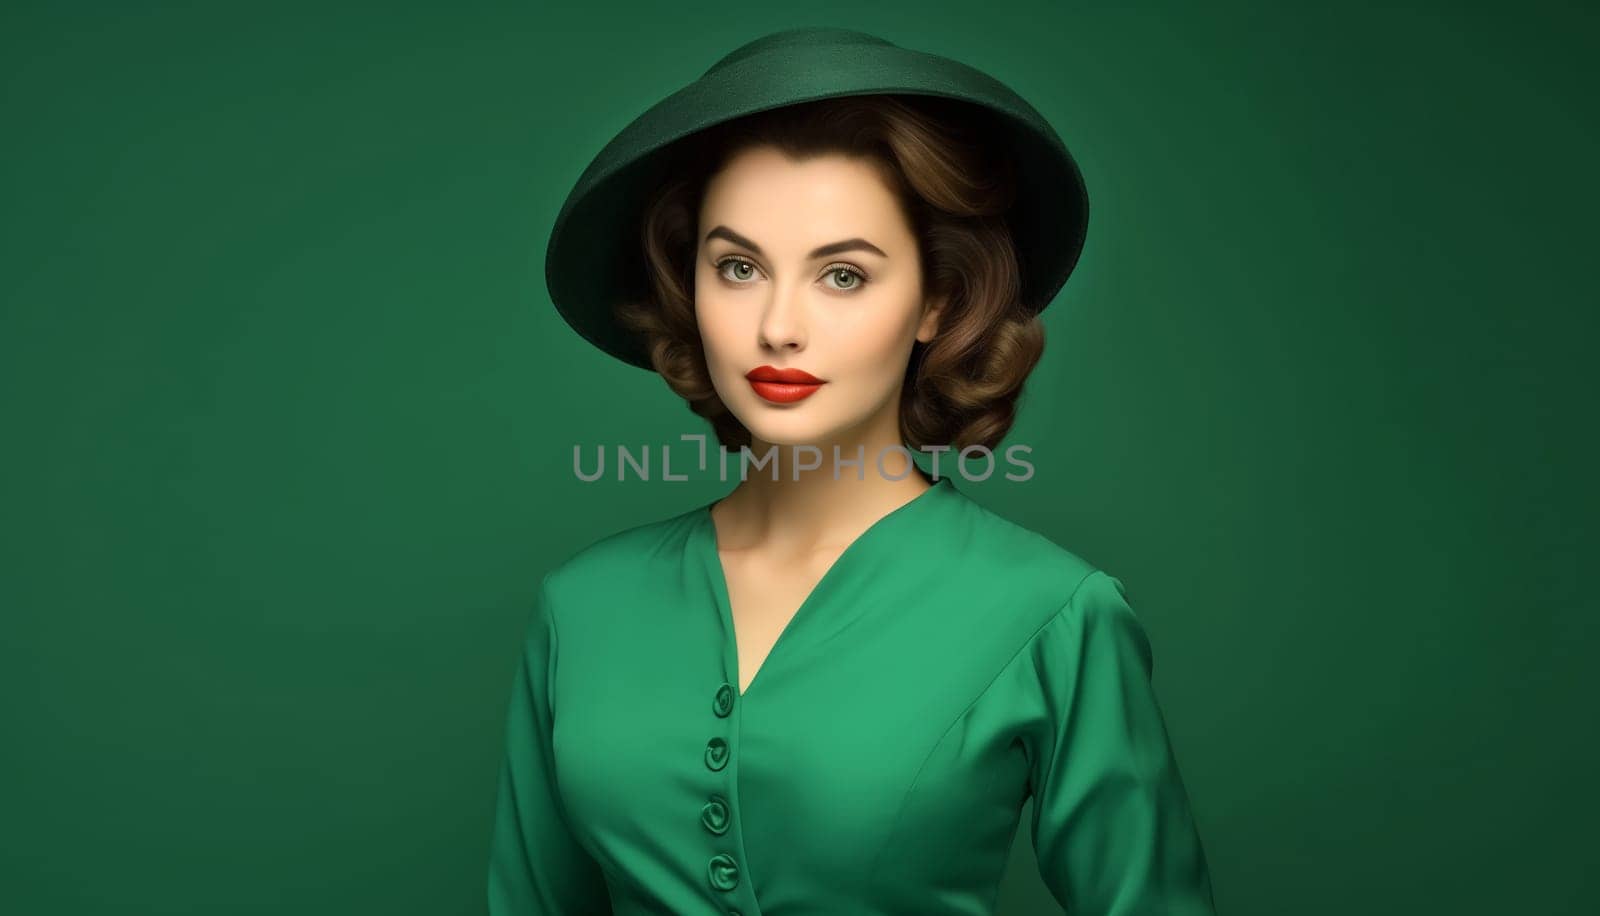 Portrait of beautiful elegant stylish woman in round hat, lady in retro style posing on green background